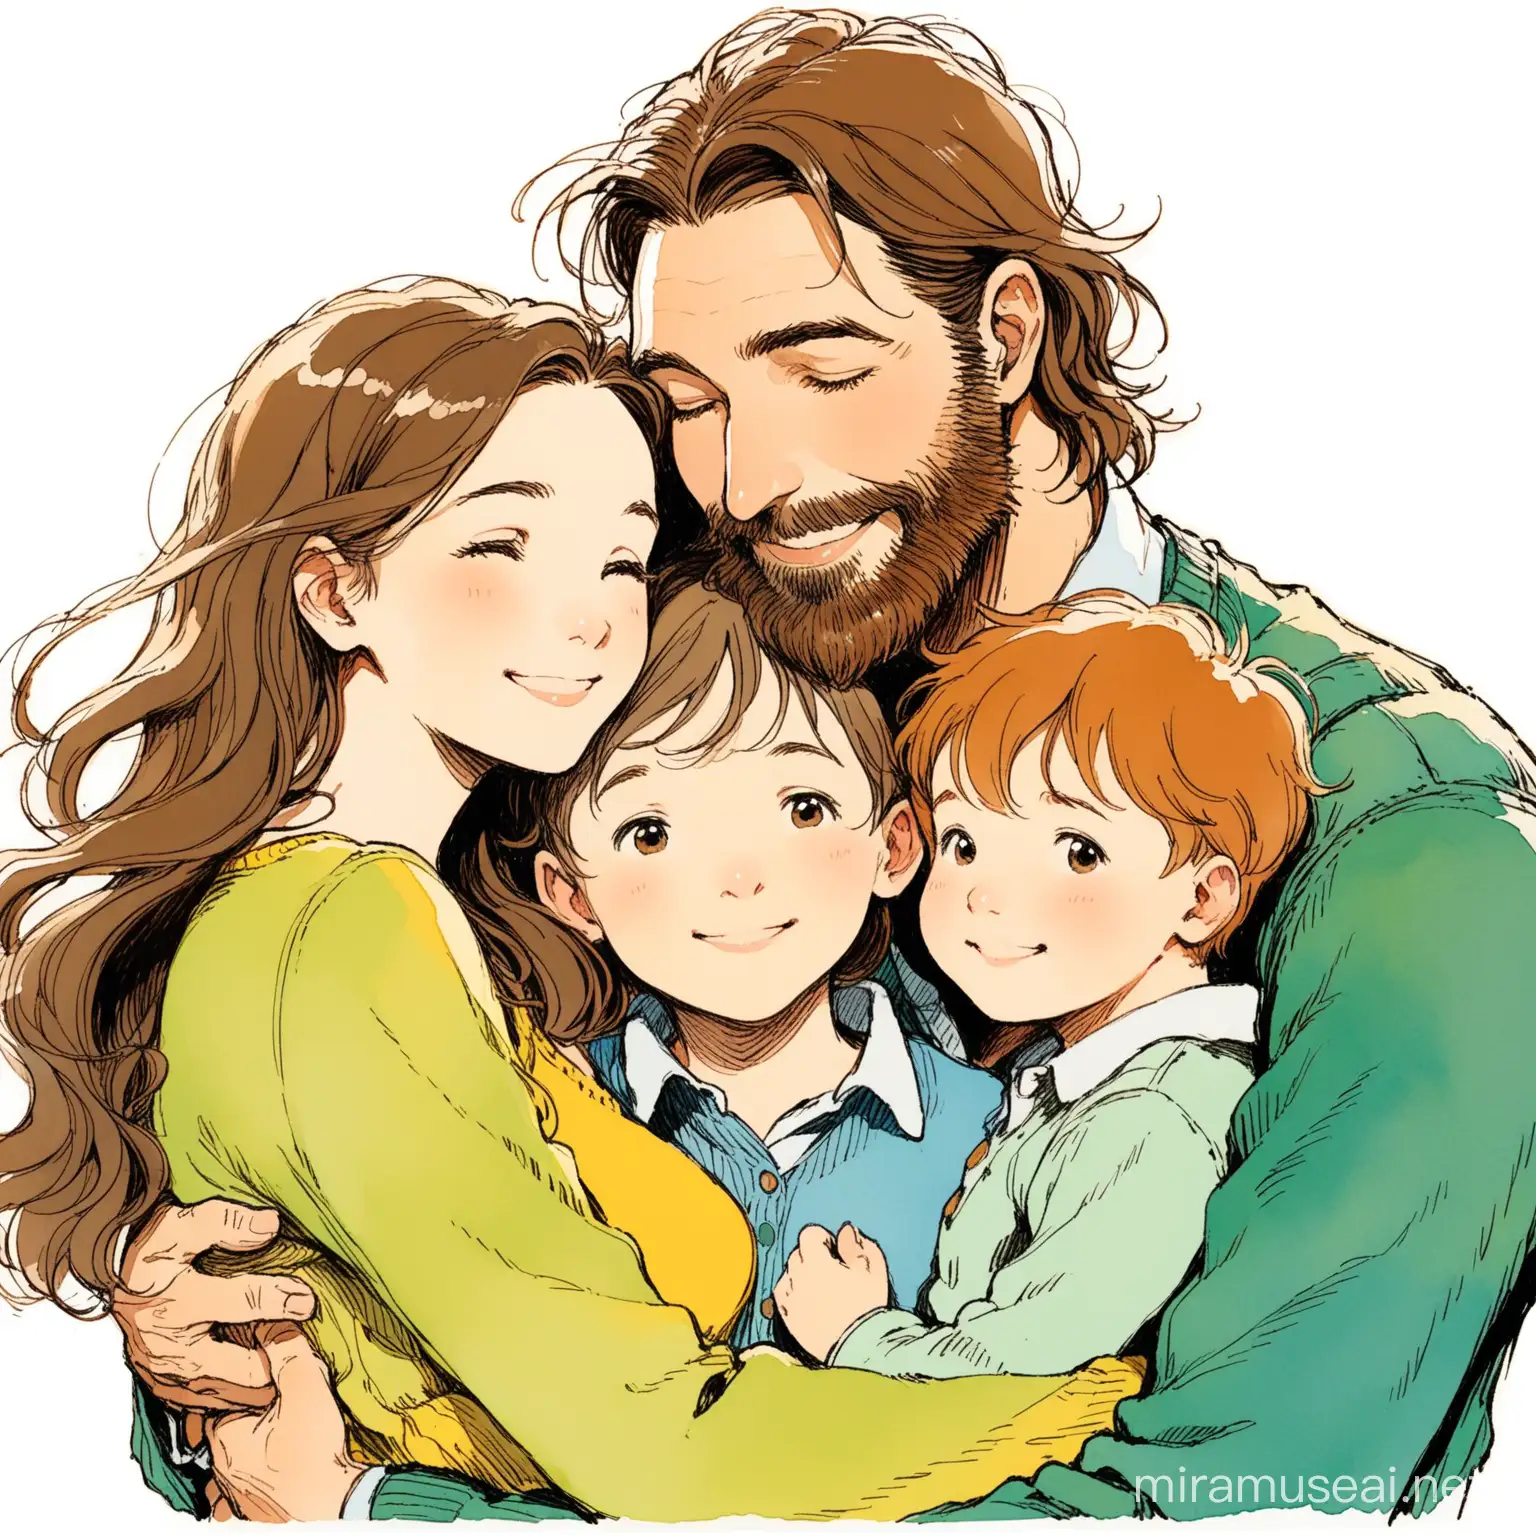 beautiful woman with long brown wavy hair, handsome man with short brown beard and three little boys tenderly embraced, smiling barely noticeable, Quentin Blake illustration 